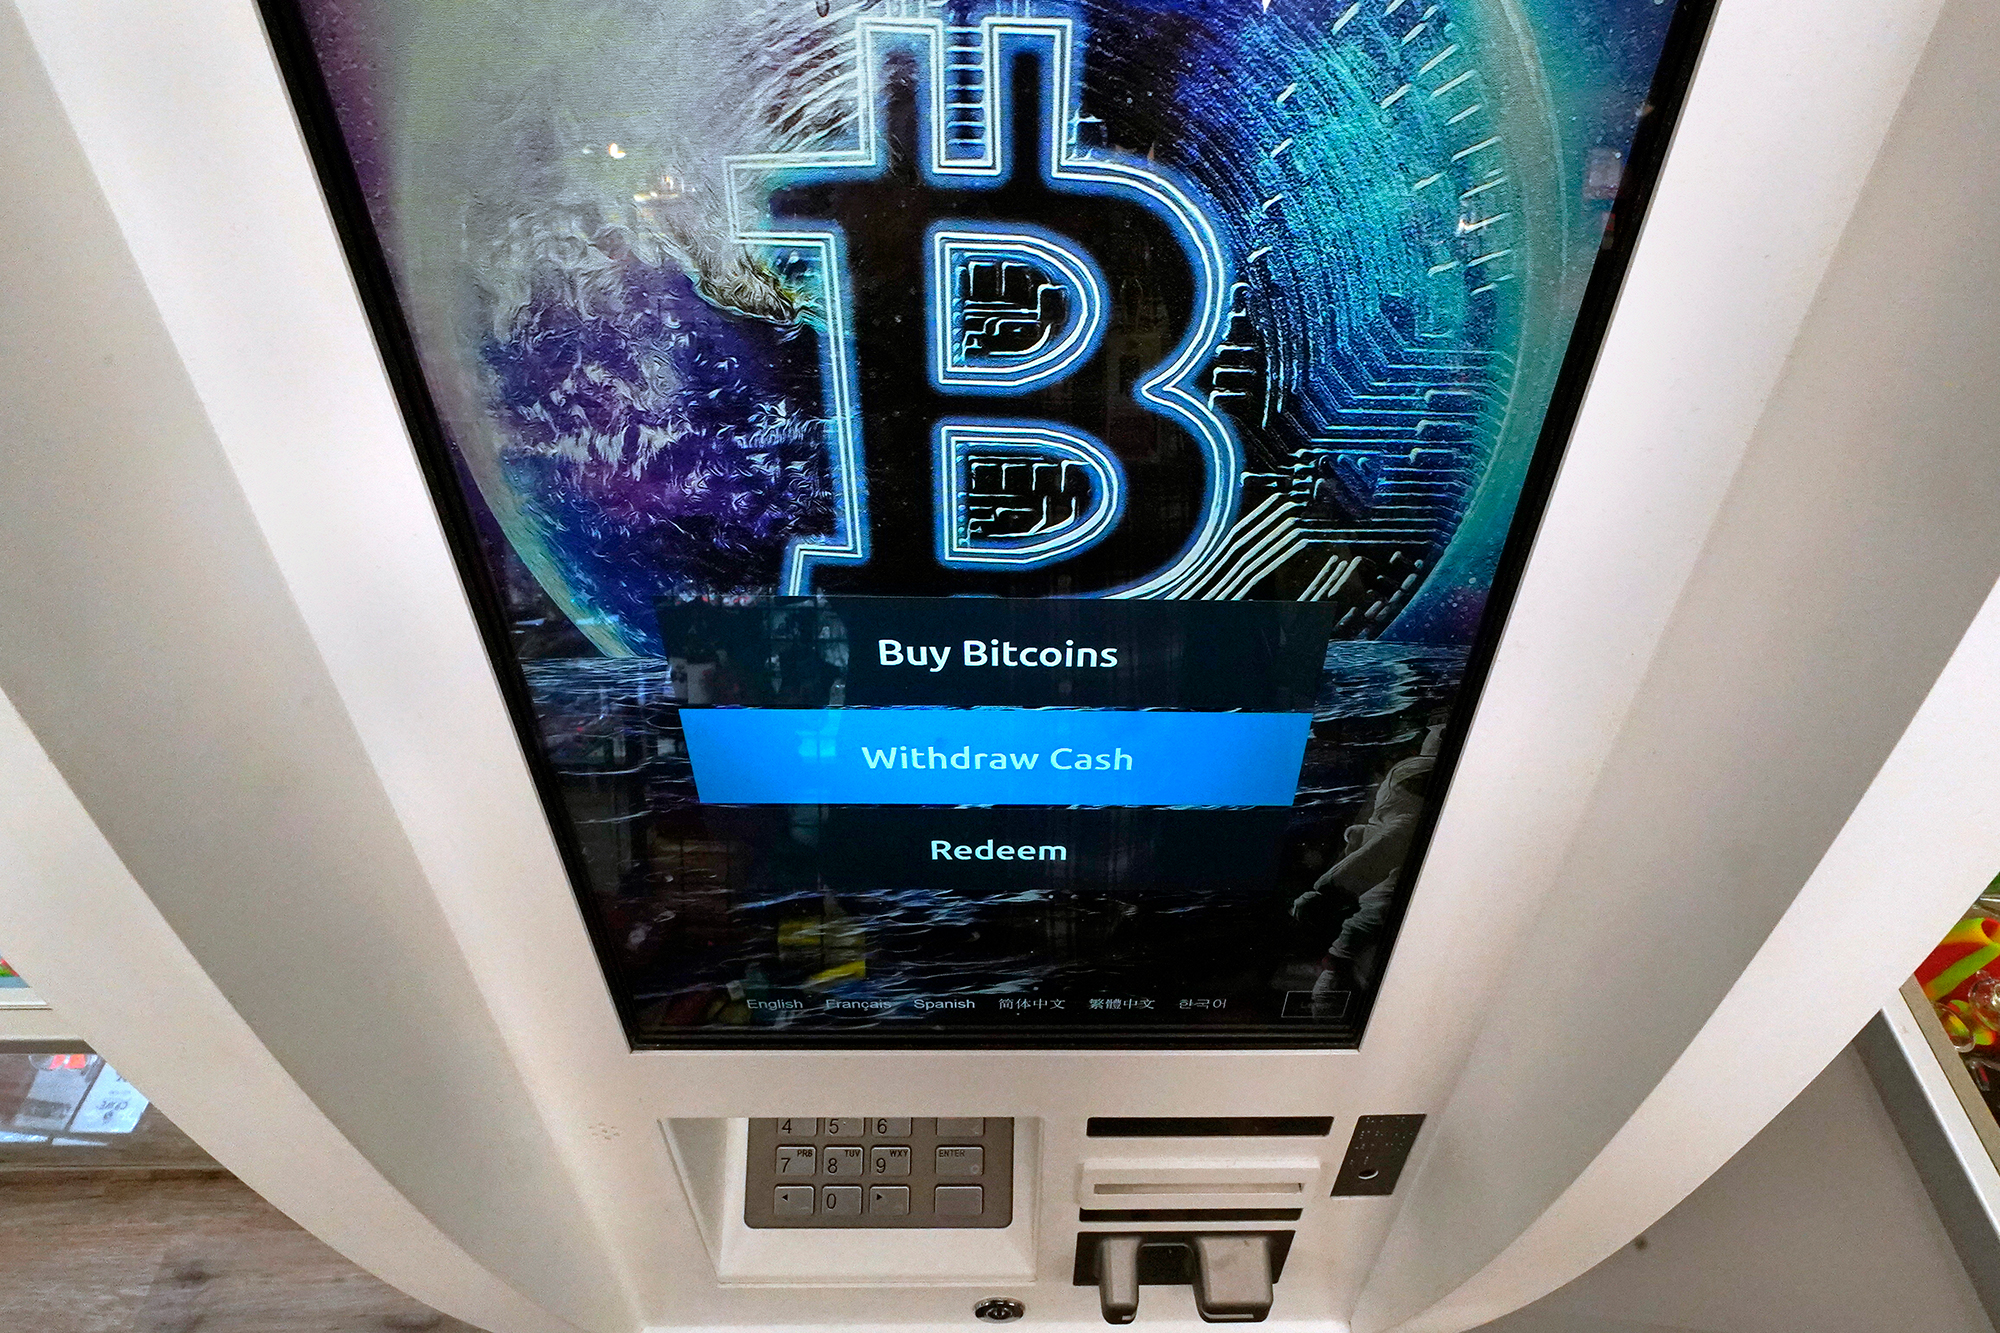 Manhattan's first Bitcoin ATM is now operating